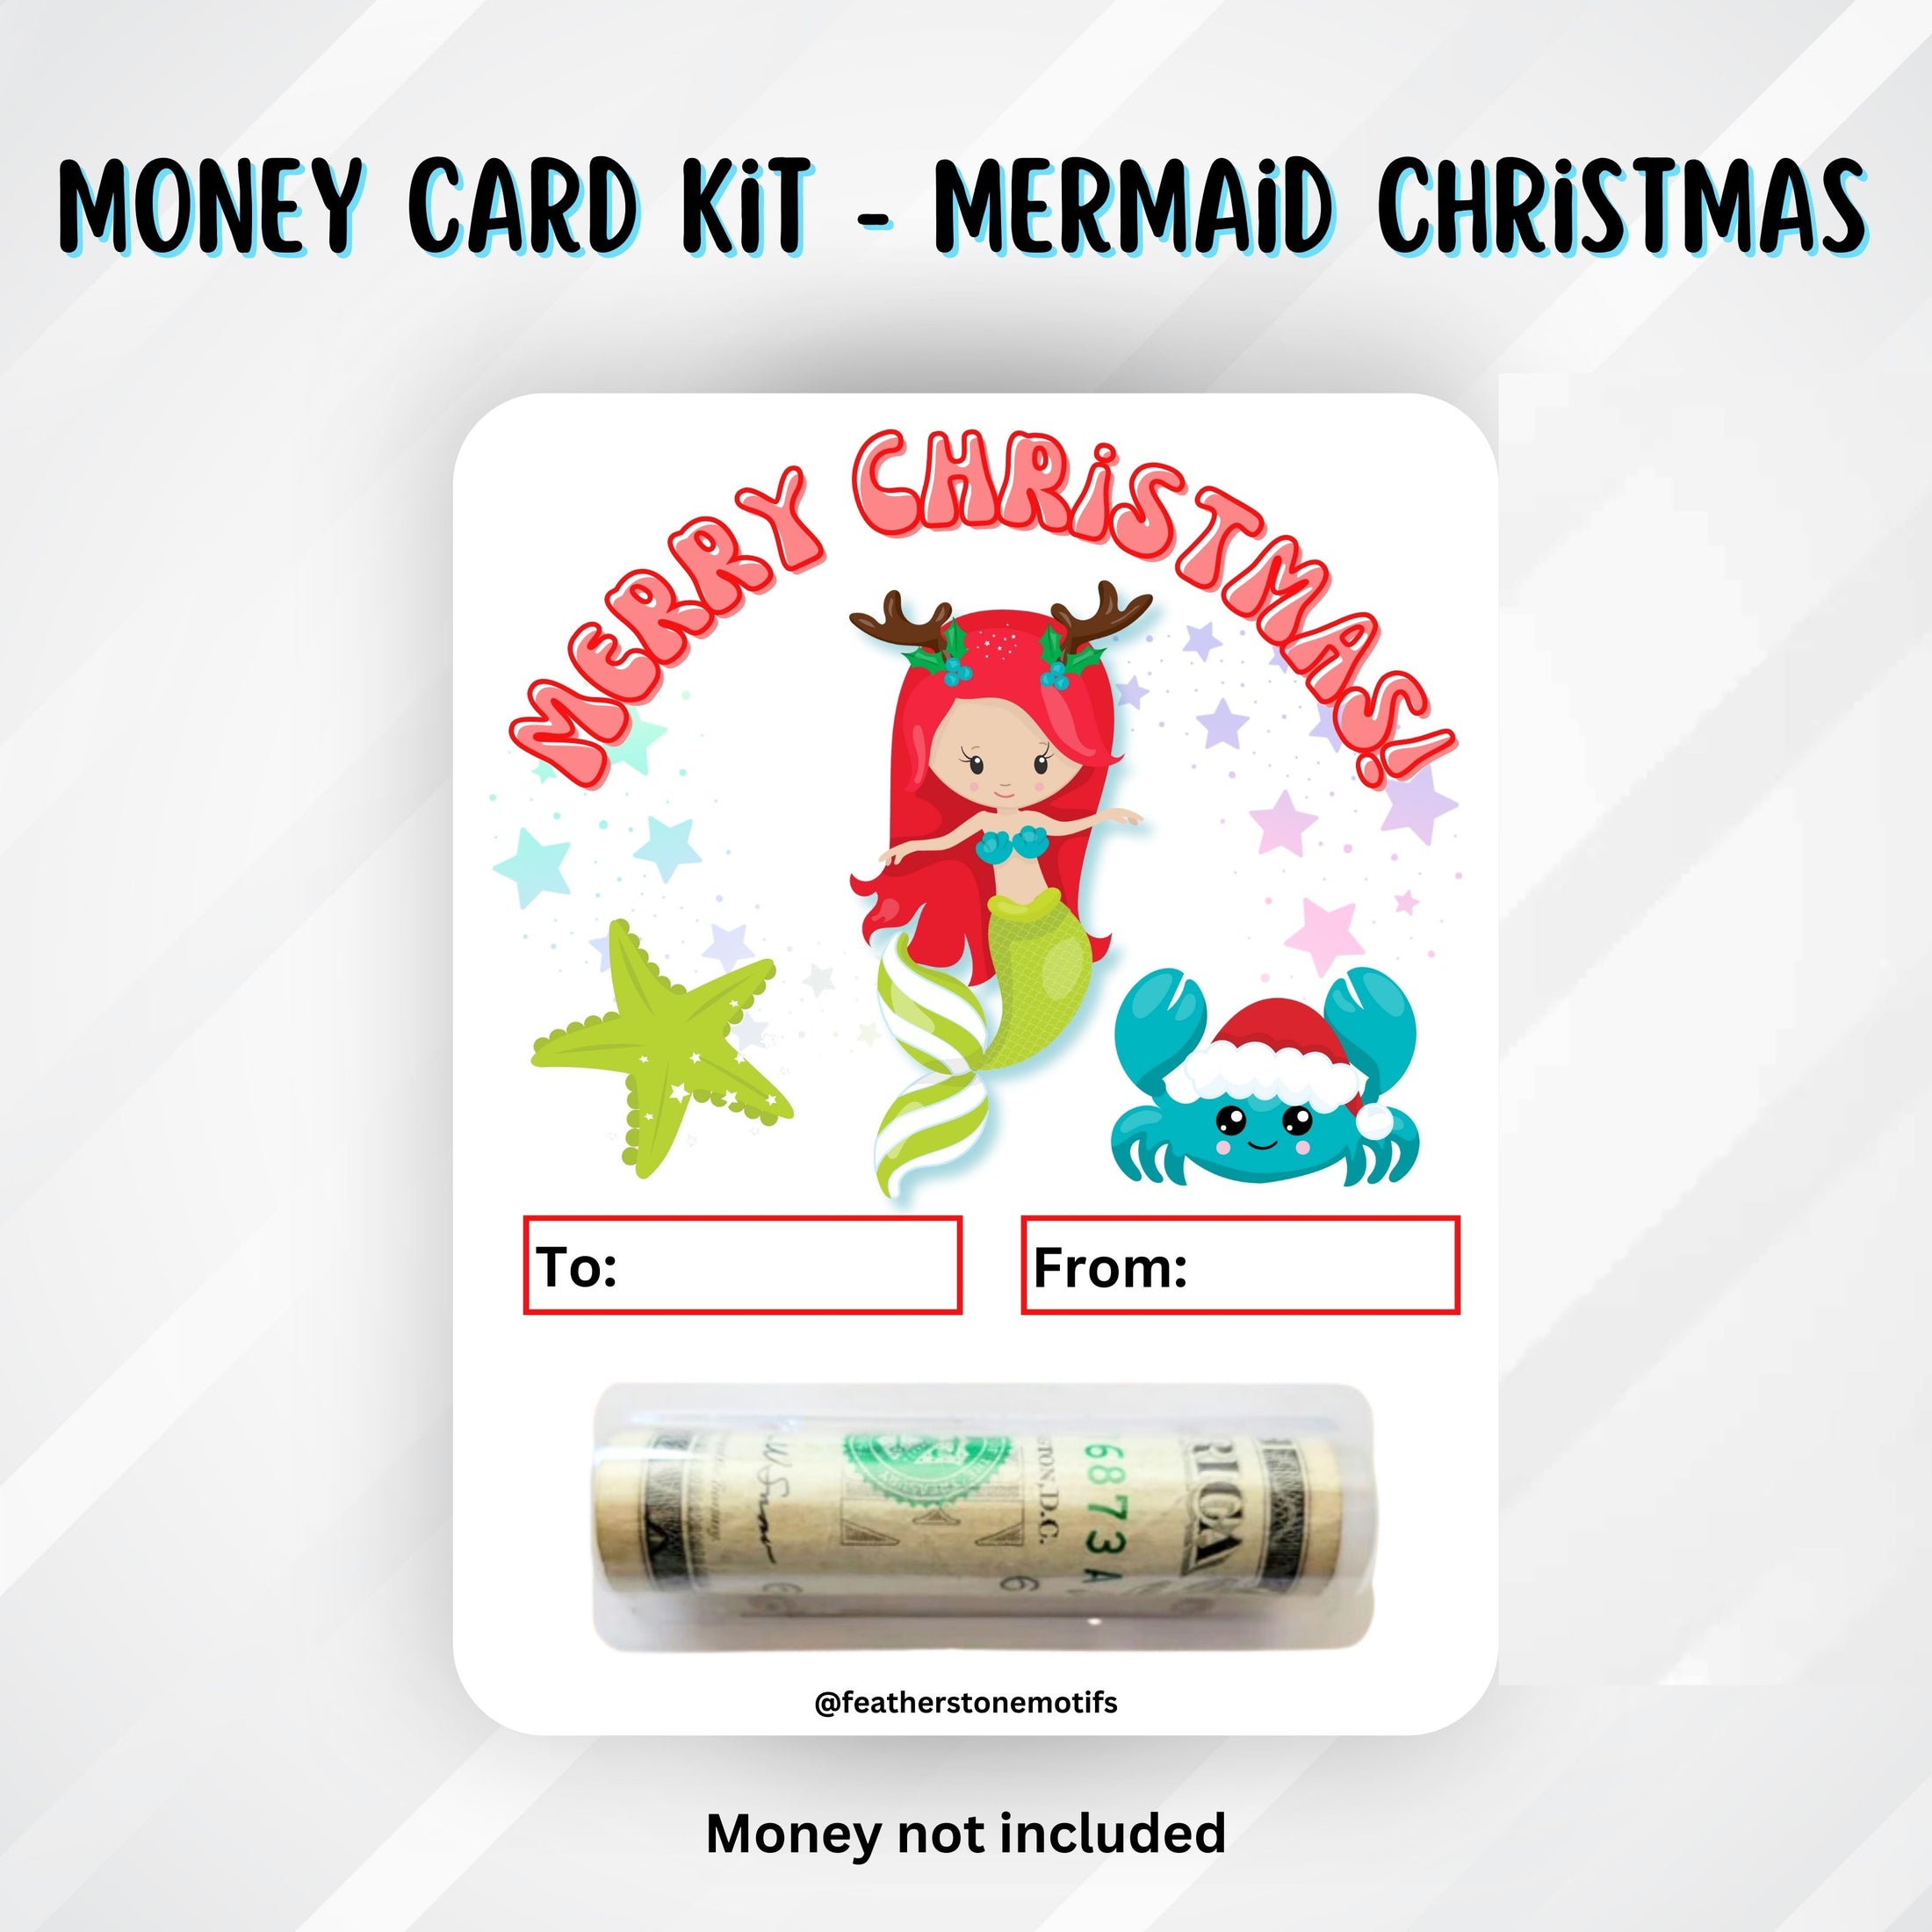 This image shows the money tube attached to the Mermaid money card.